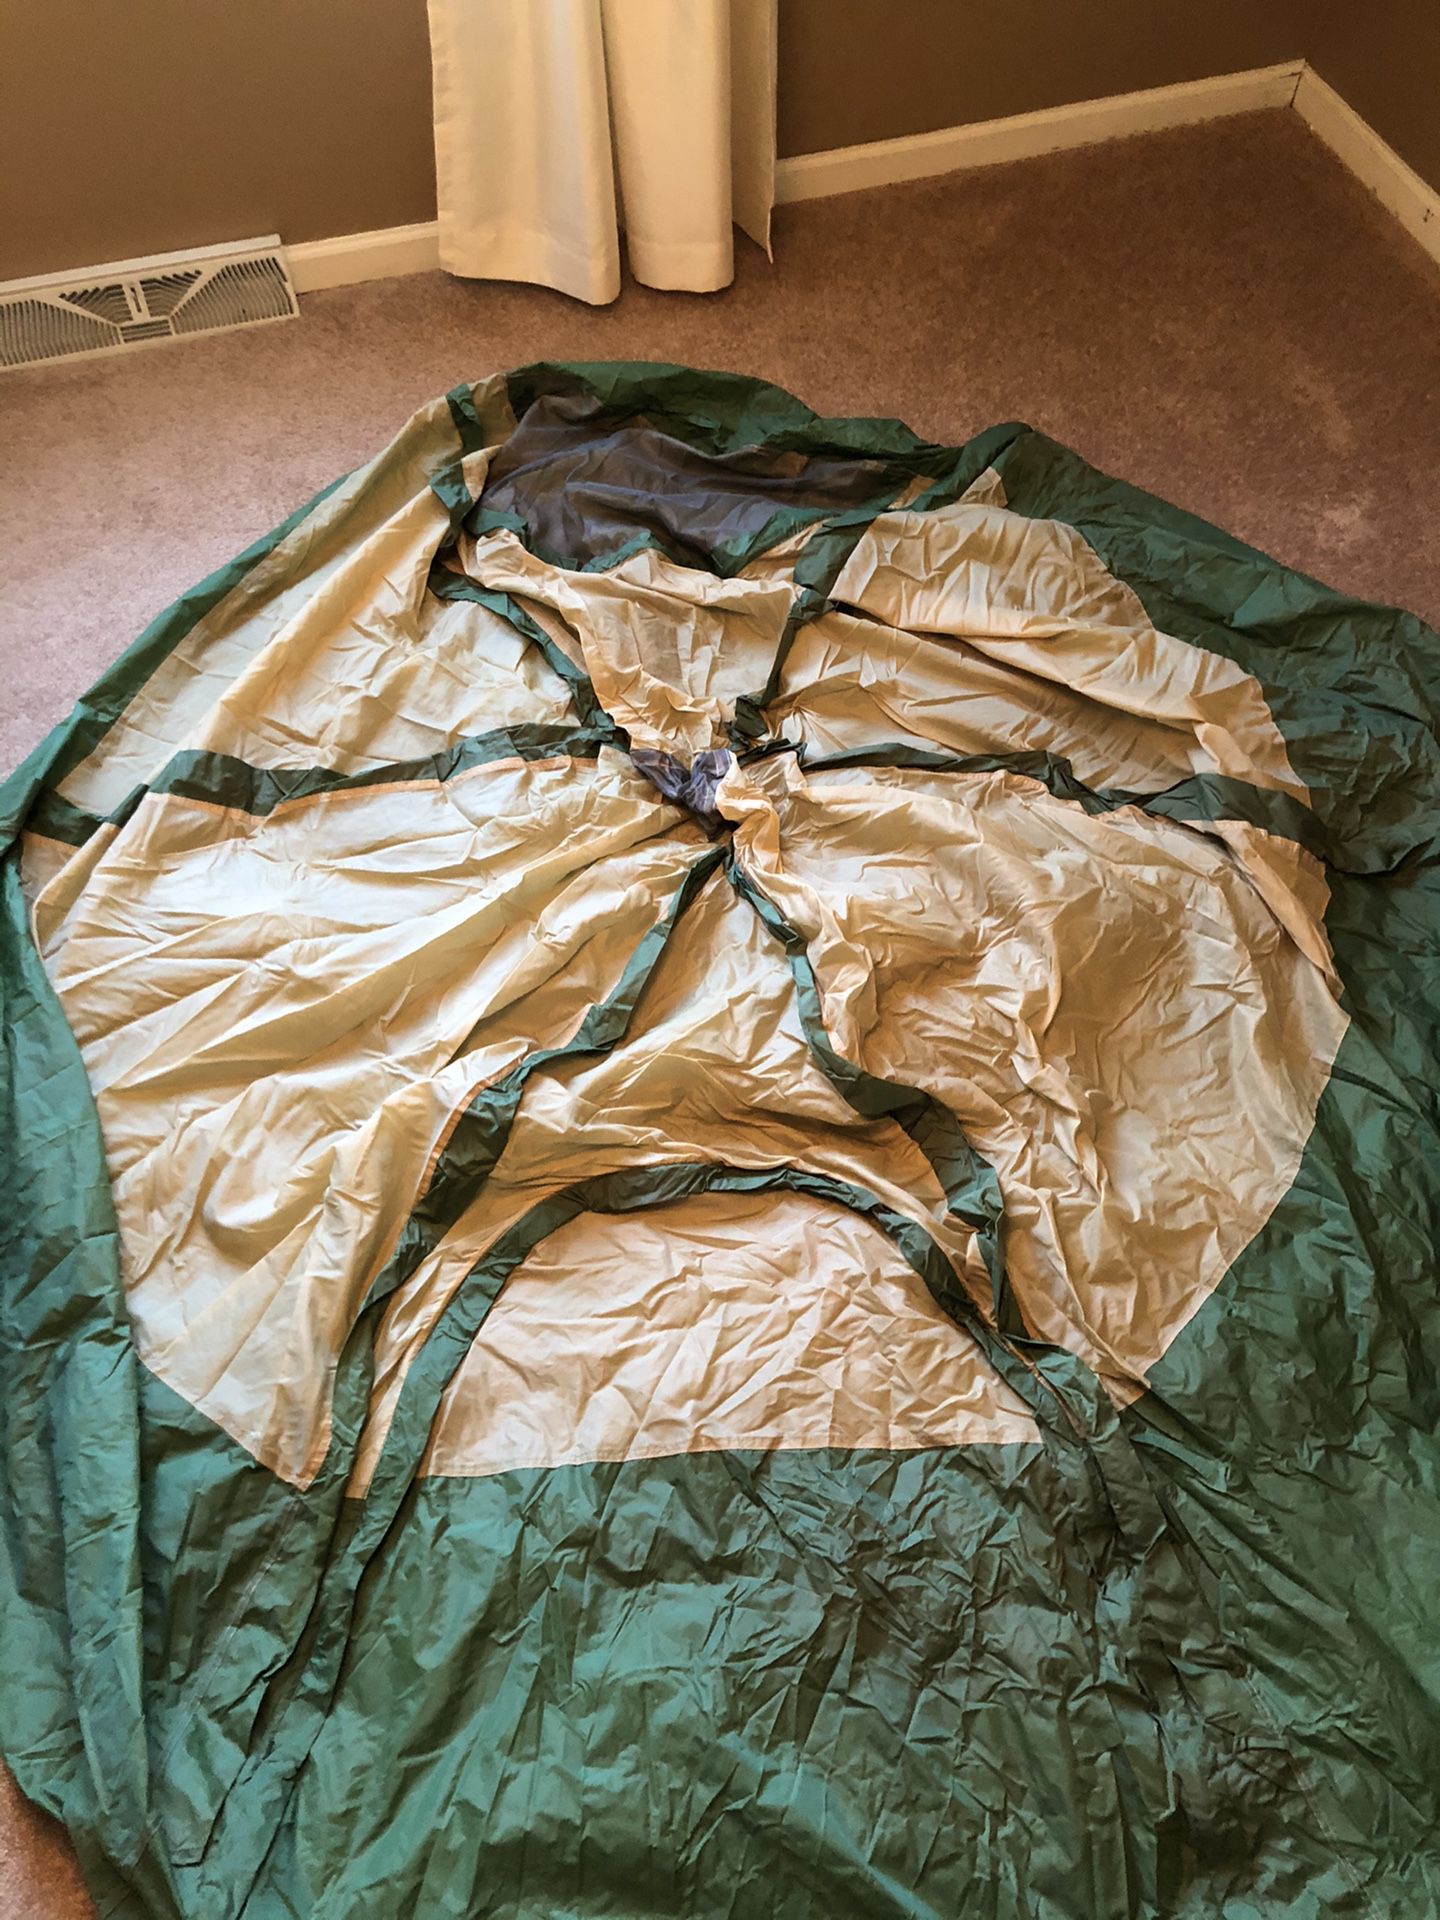 Tent (possible 2-3 person) from Camp Ways